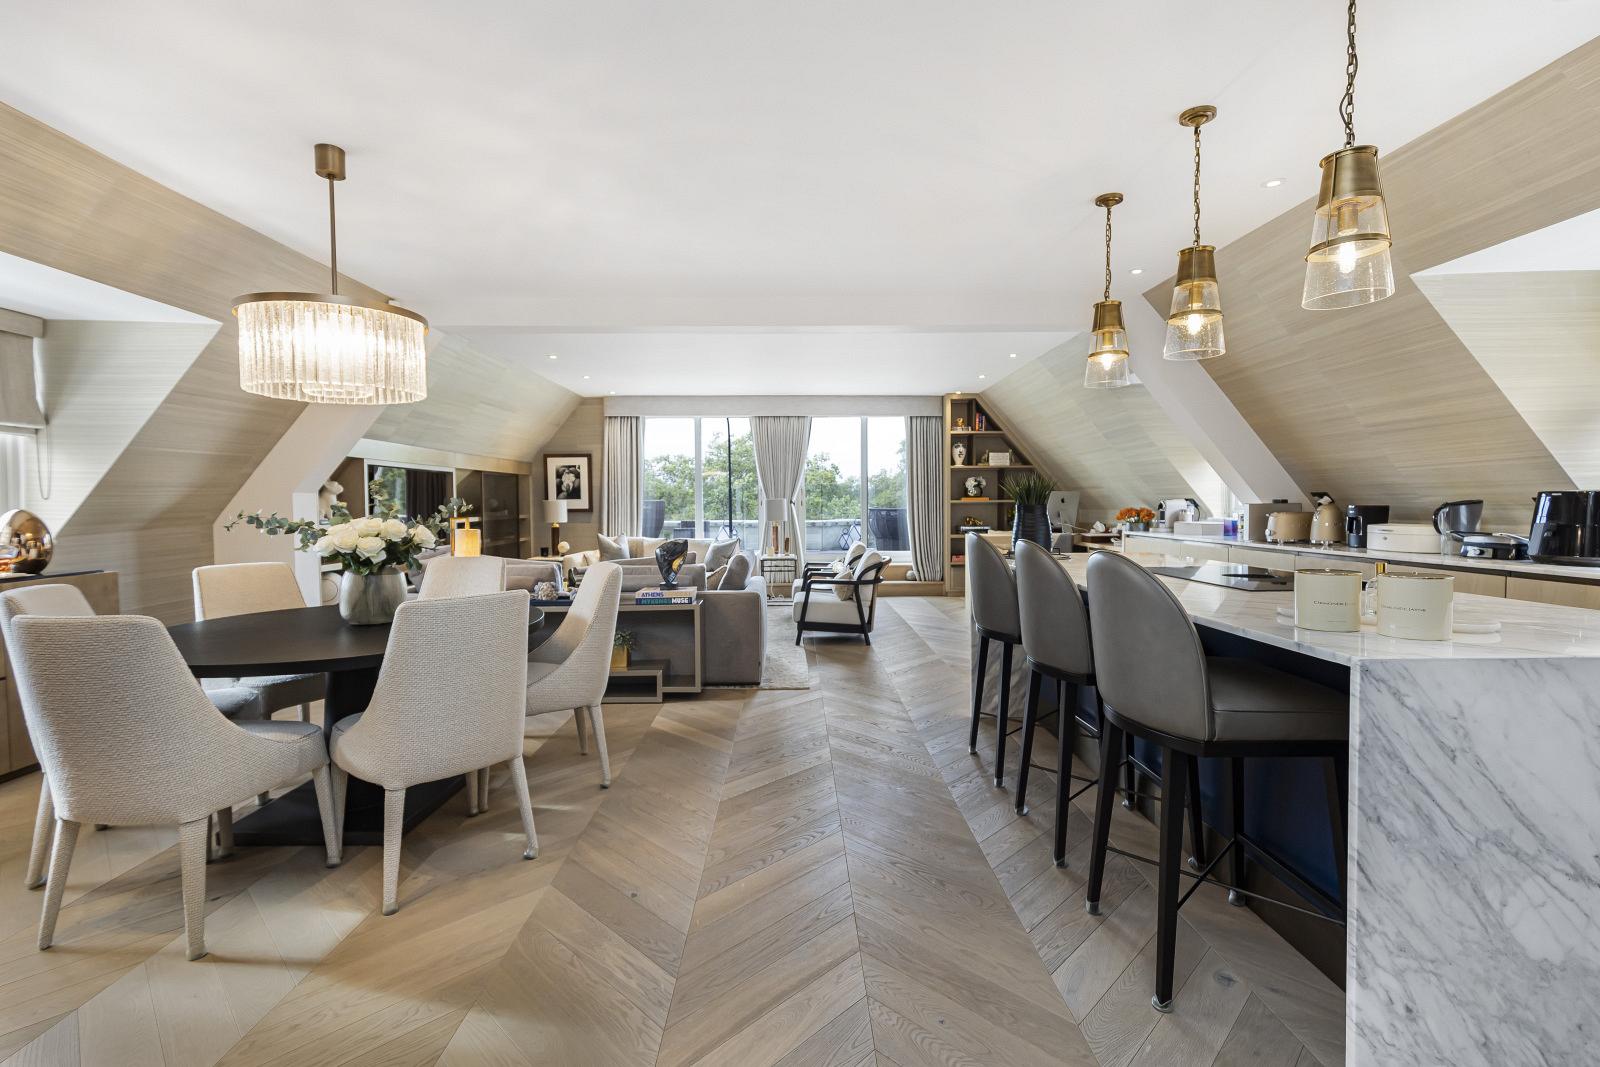 A wide room with tables and a kitchen counter atop a herringbone floor.